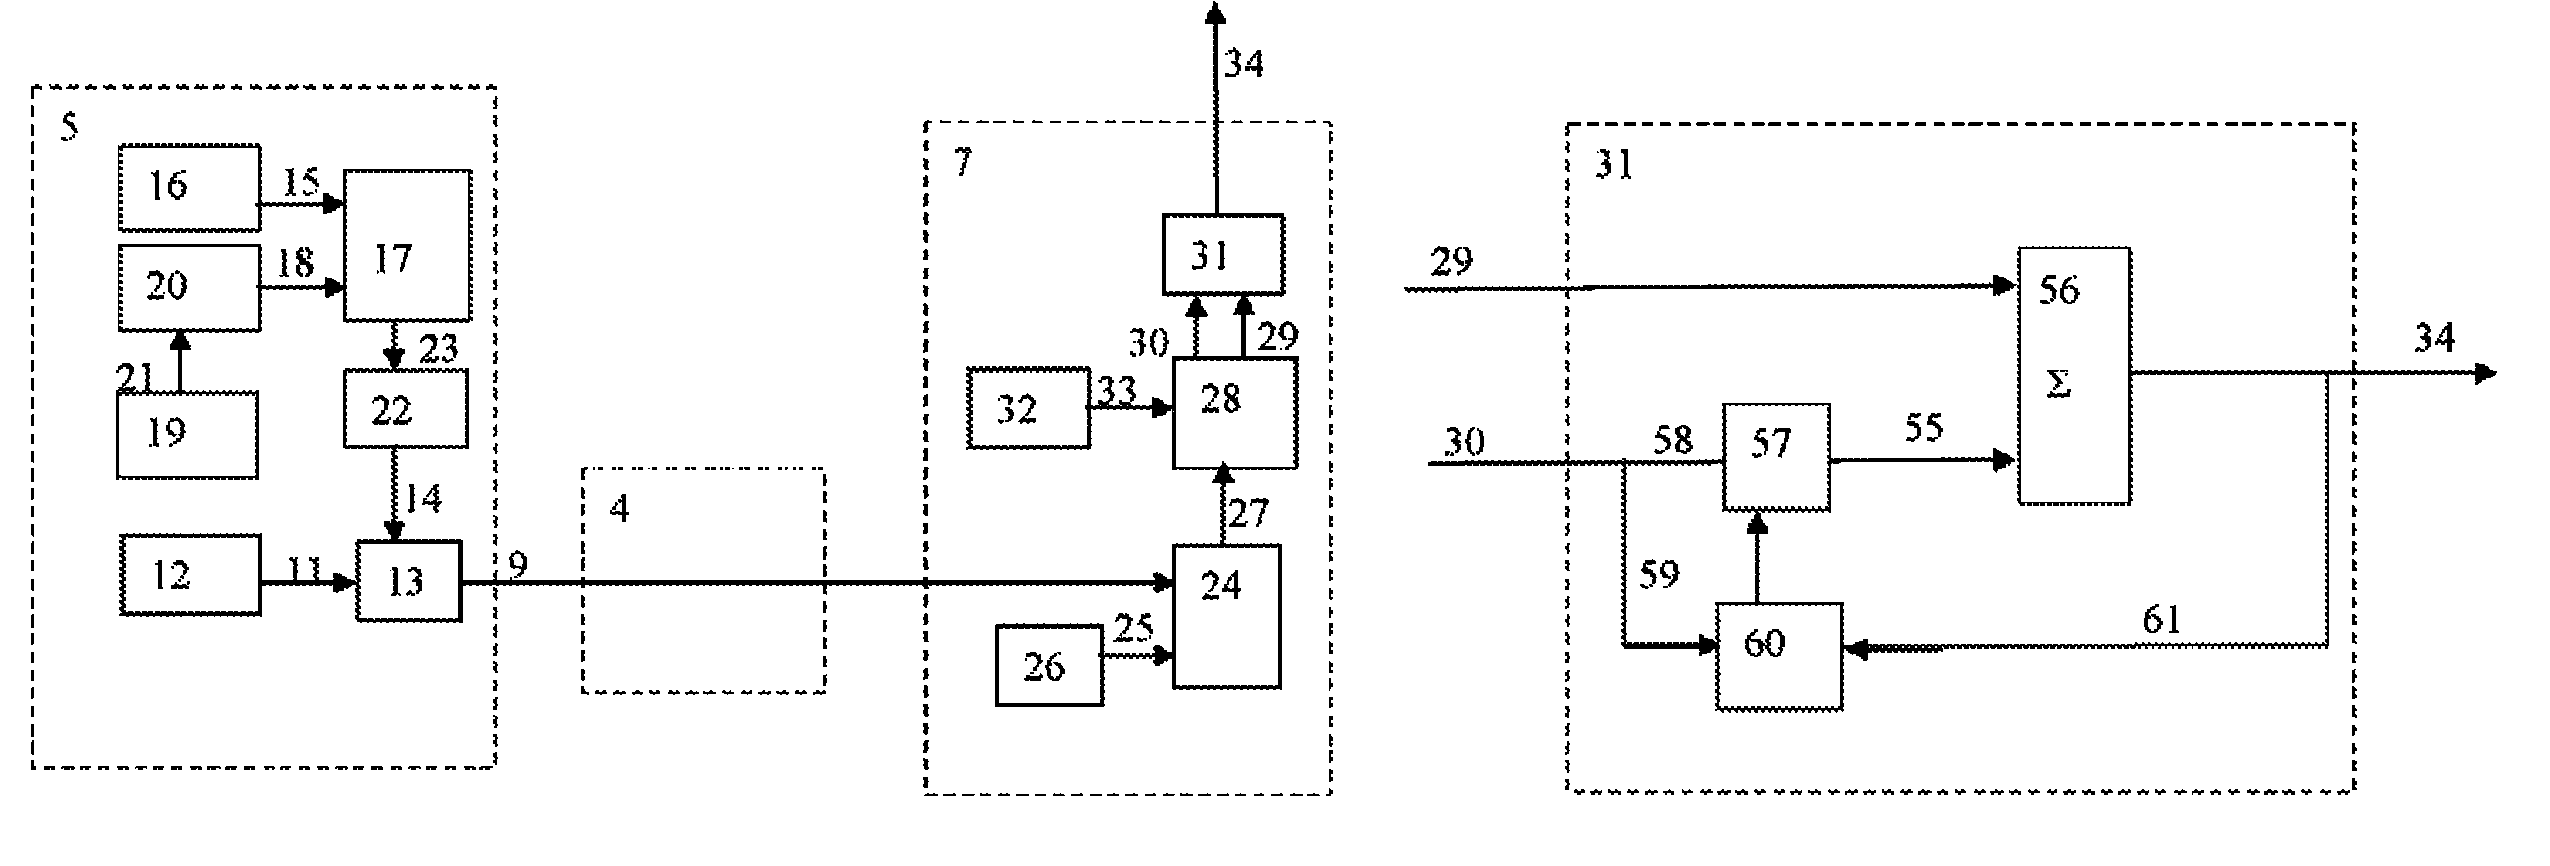 Coherent optical transceiver and coherent communication system and method for satellite communications